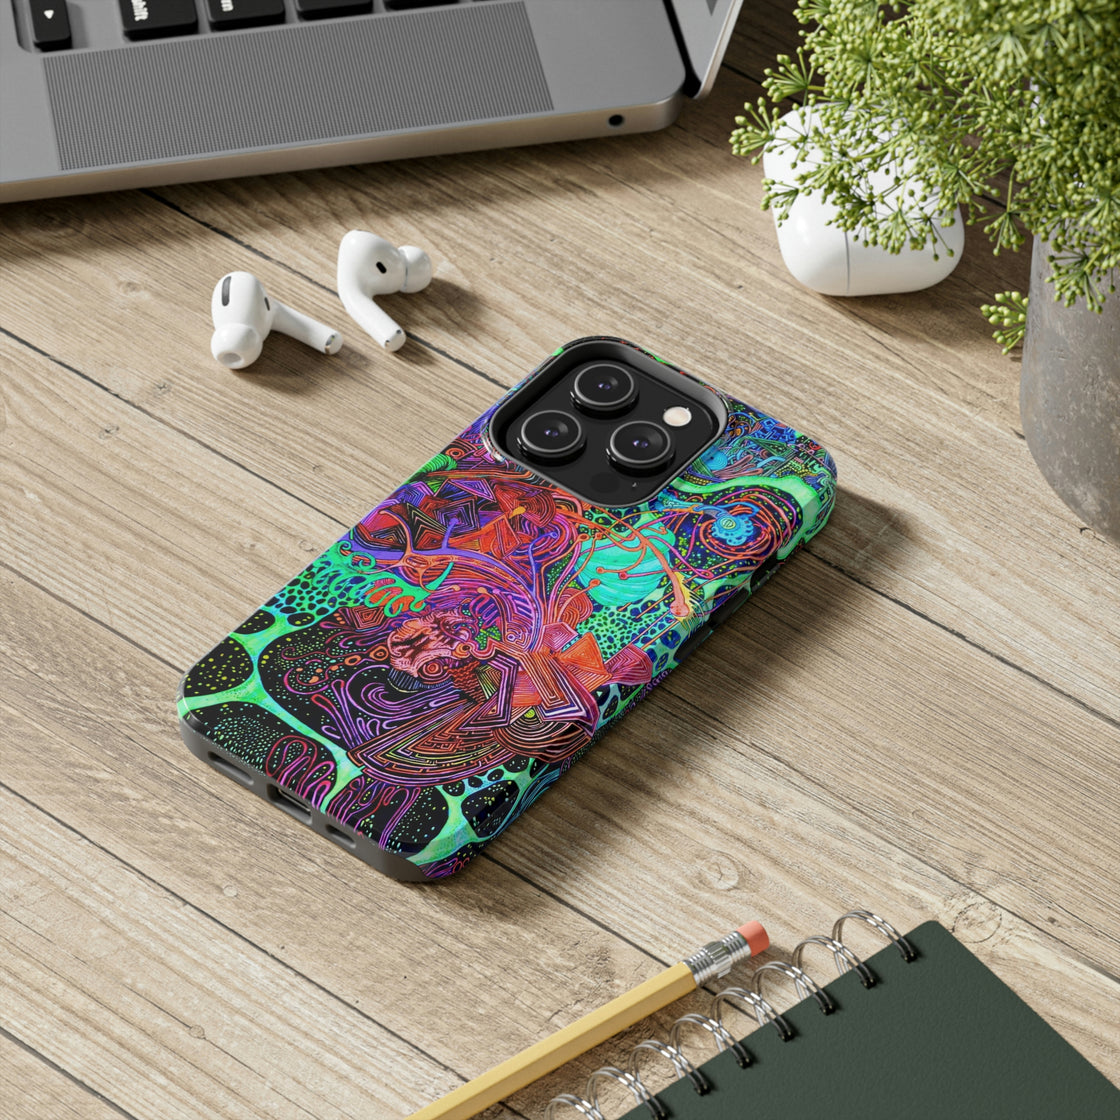 Trippy Tough iPhone Cases, Case-Mate IPhone